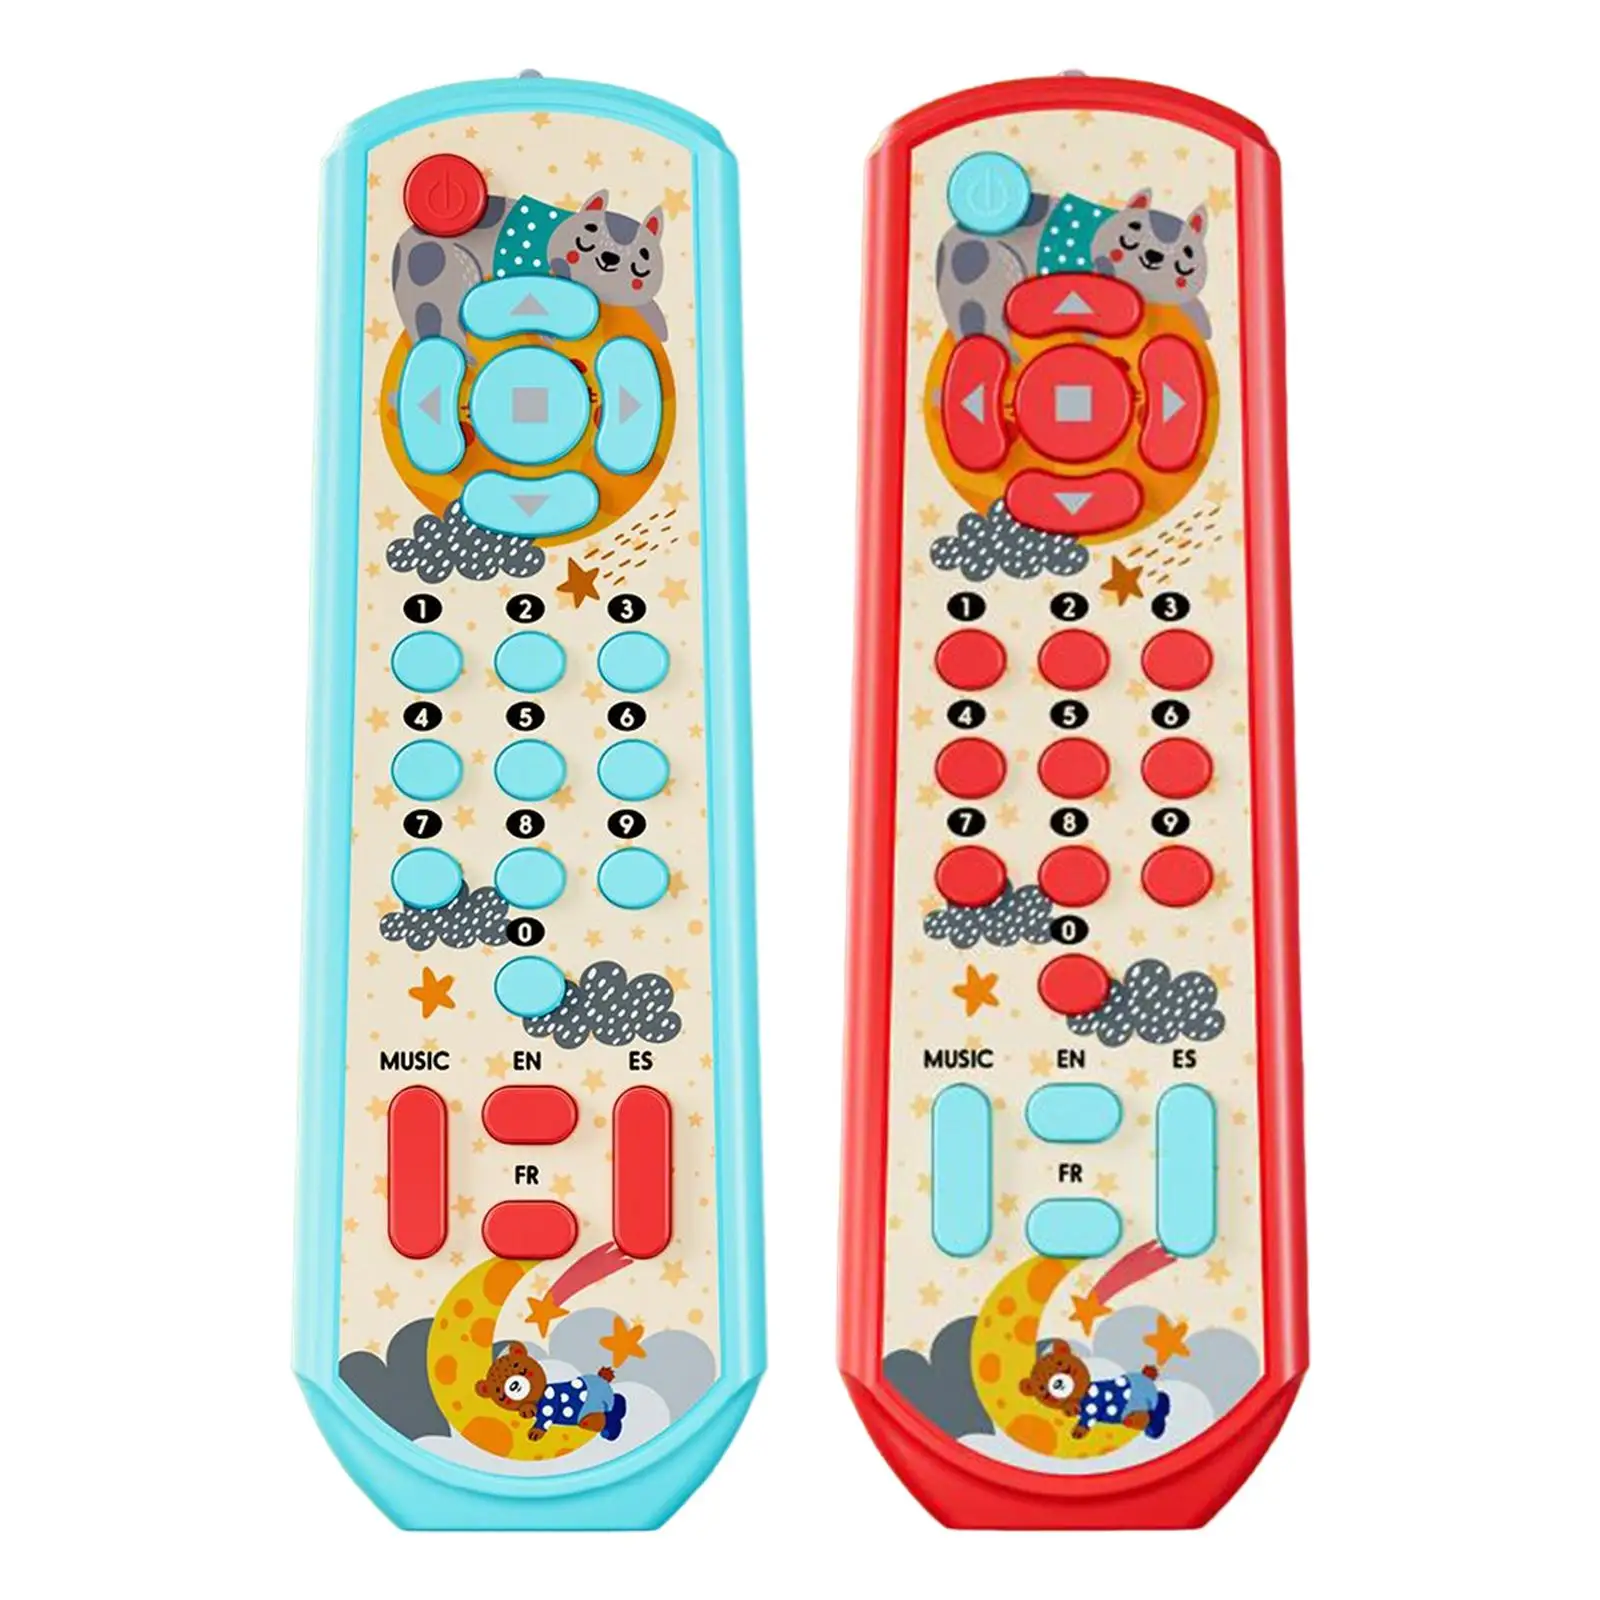 TV Remote Control Toy Early Educational Toys for Kids Toddler Birthday Gifts